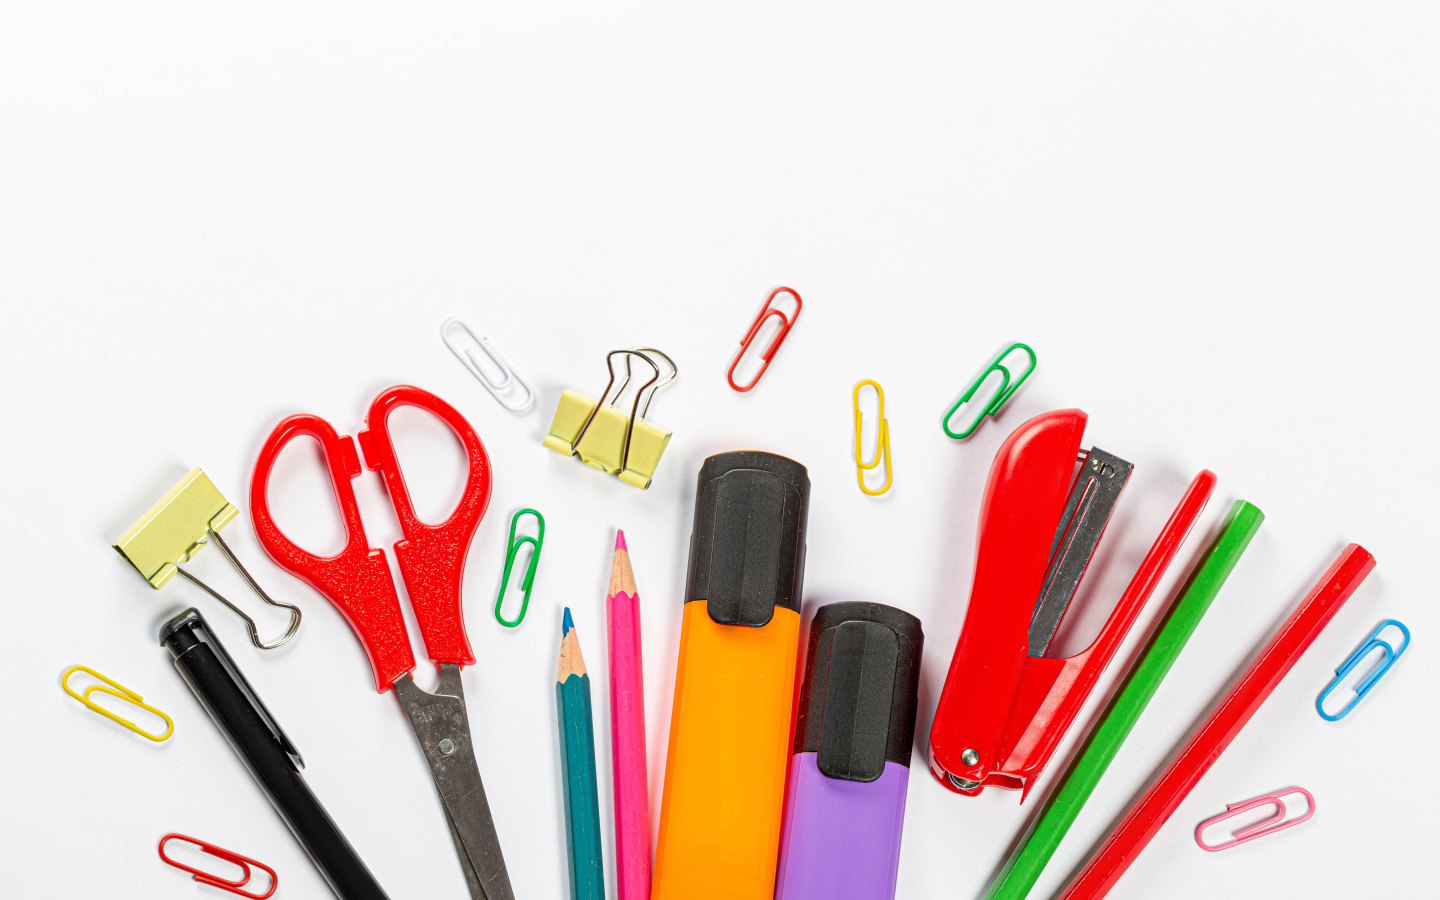 Multicolored office supplies on a white background